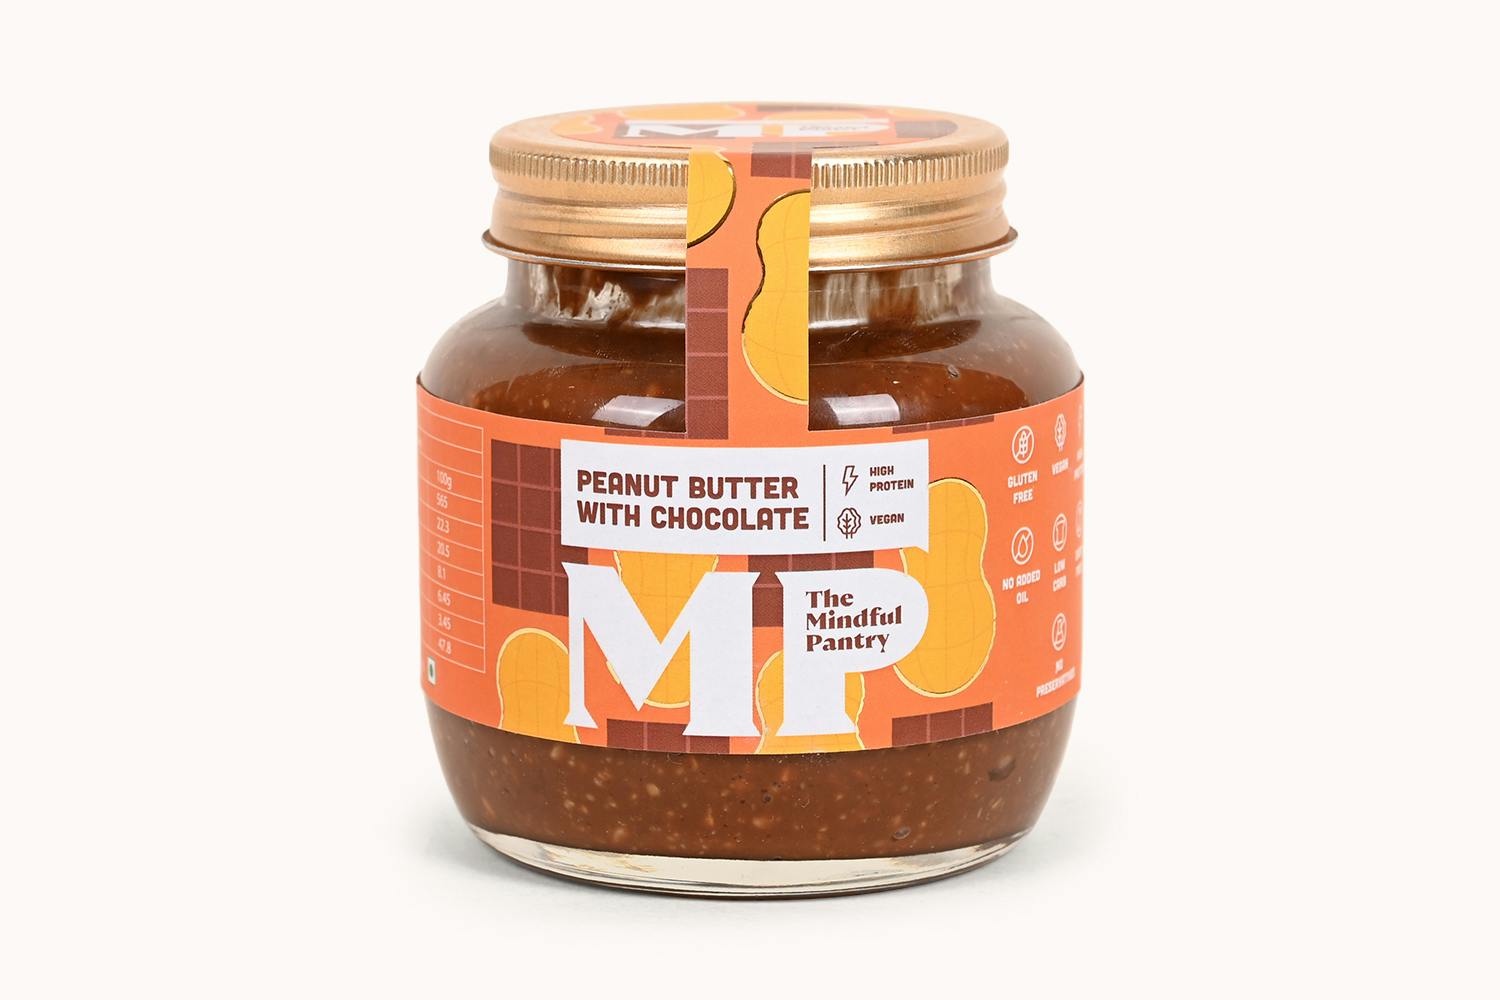 The Mindful Pantry Peanut Butter with Chocolate